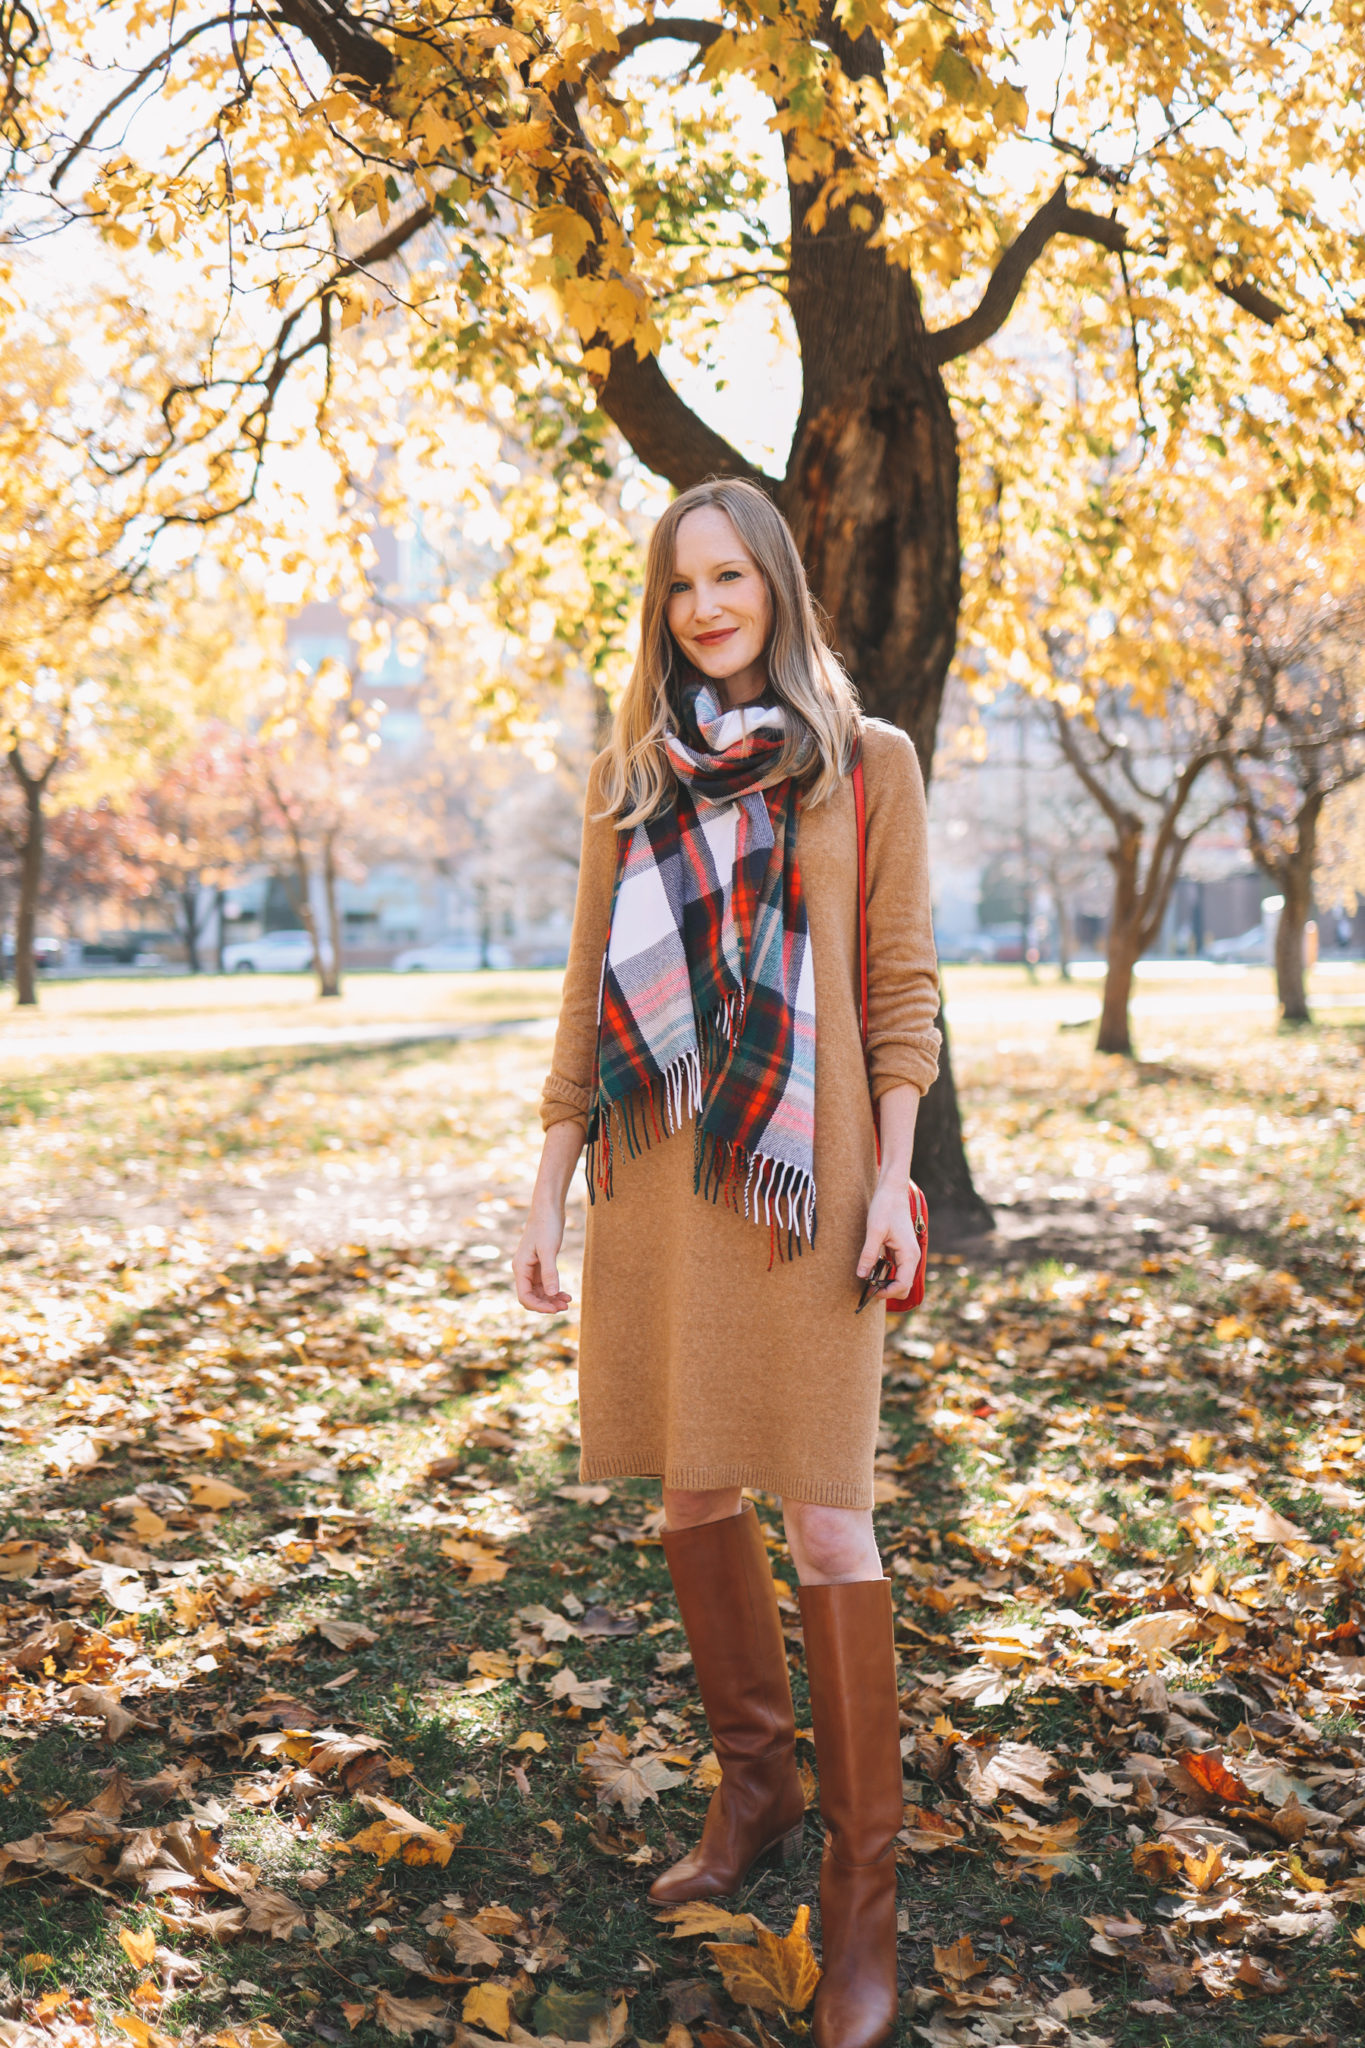 $34.50 Camel Sweater Dress + 50% Off Favorite Scarf + Riding Boots